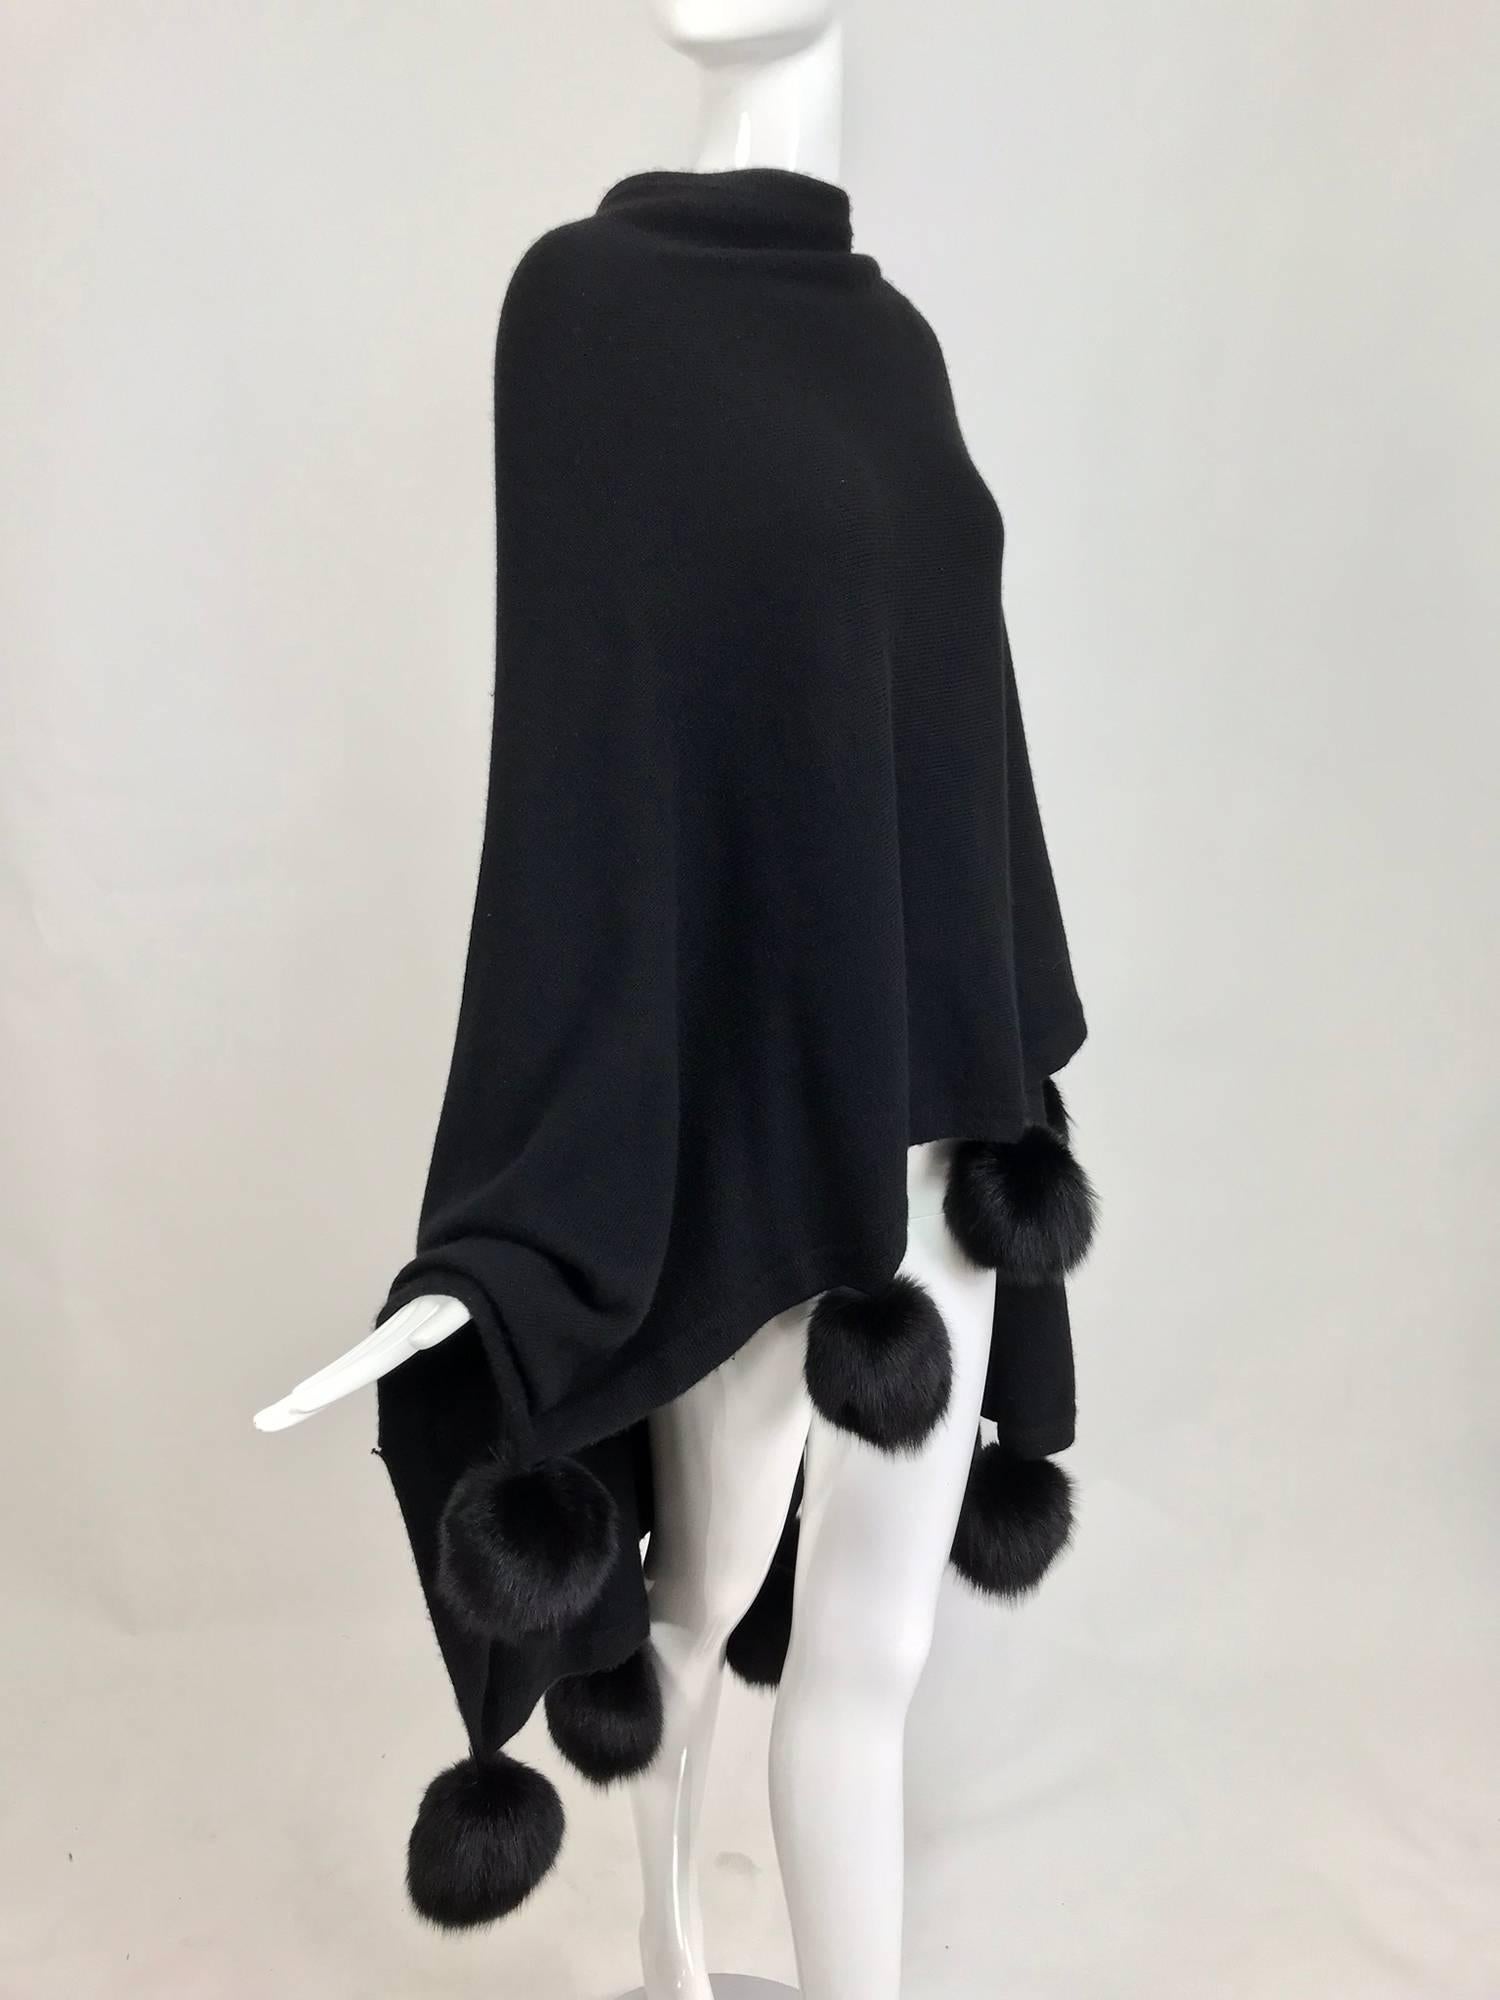 Black cashmere wool blend knit cape or wrap with black mink pom pom trims...Beautiful weight cape is perfect for day or evening...Some minor pilling...One size fits all...

In excellent wearable condition... All our clothing is dry cleaned and